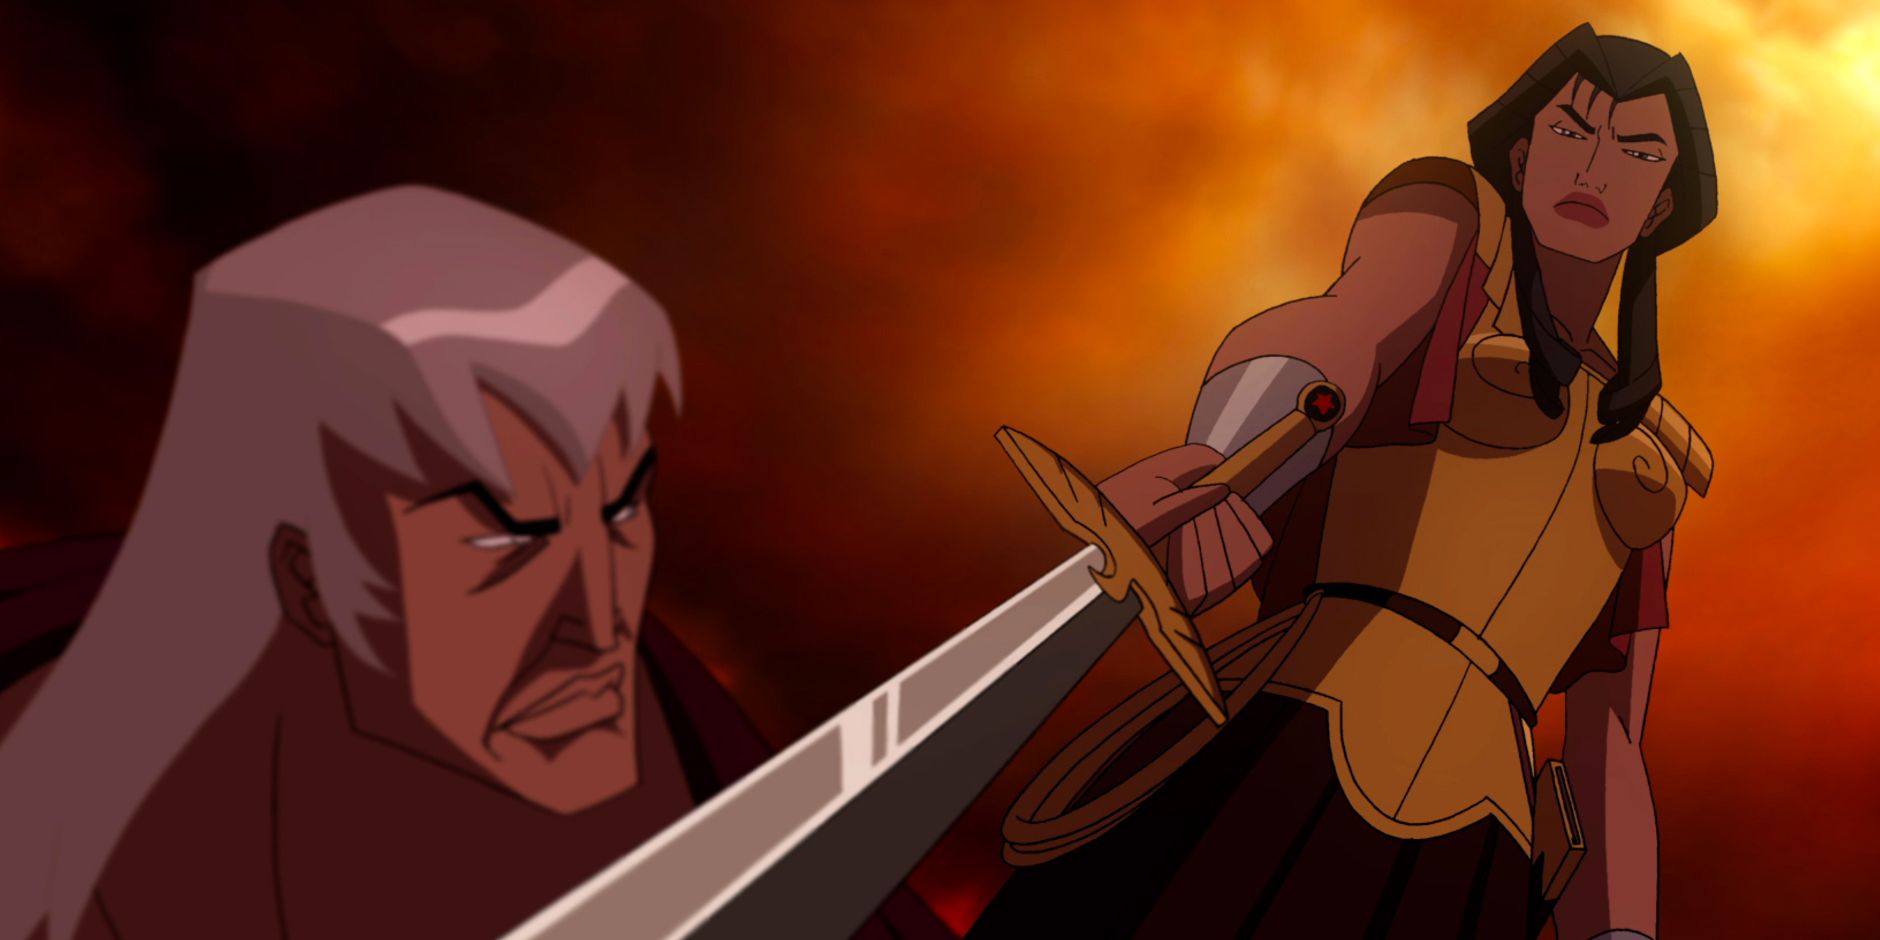 Hippolyta Battles Ares In Animation